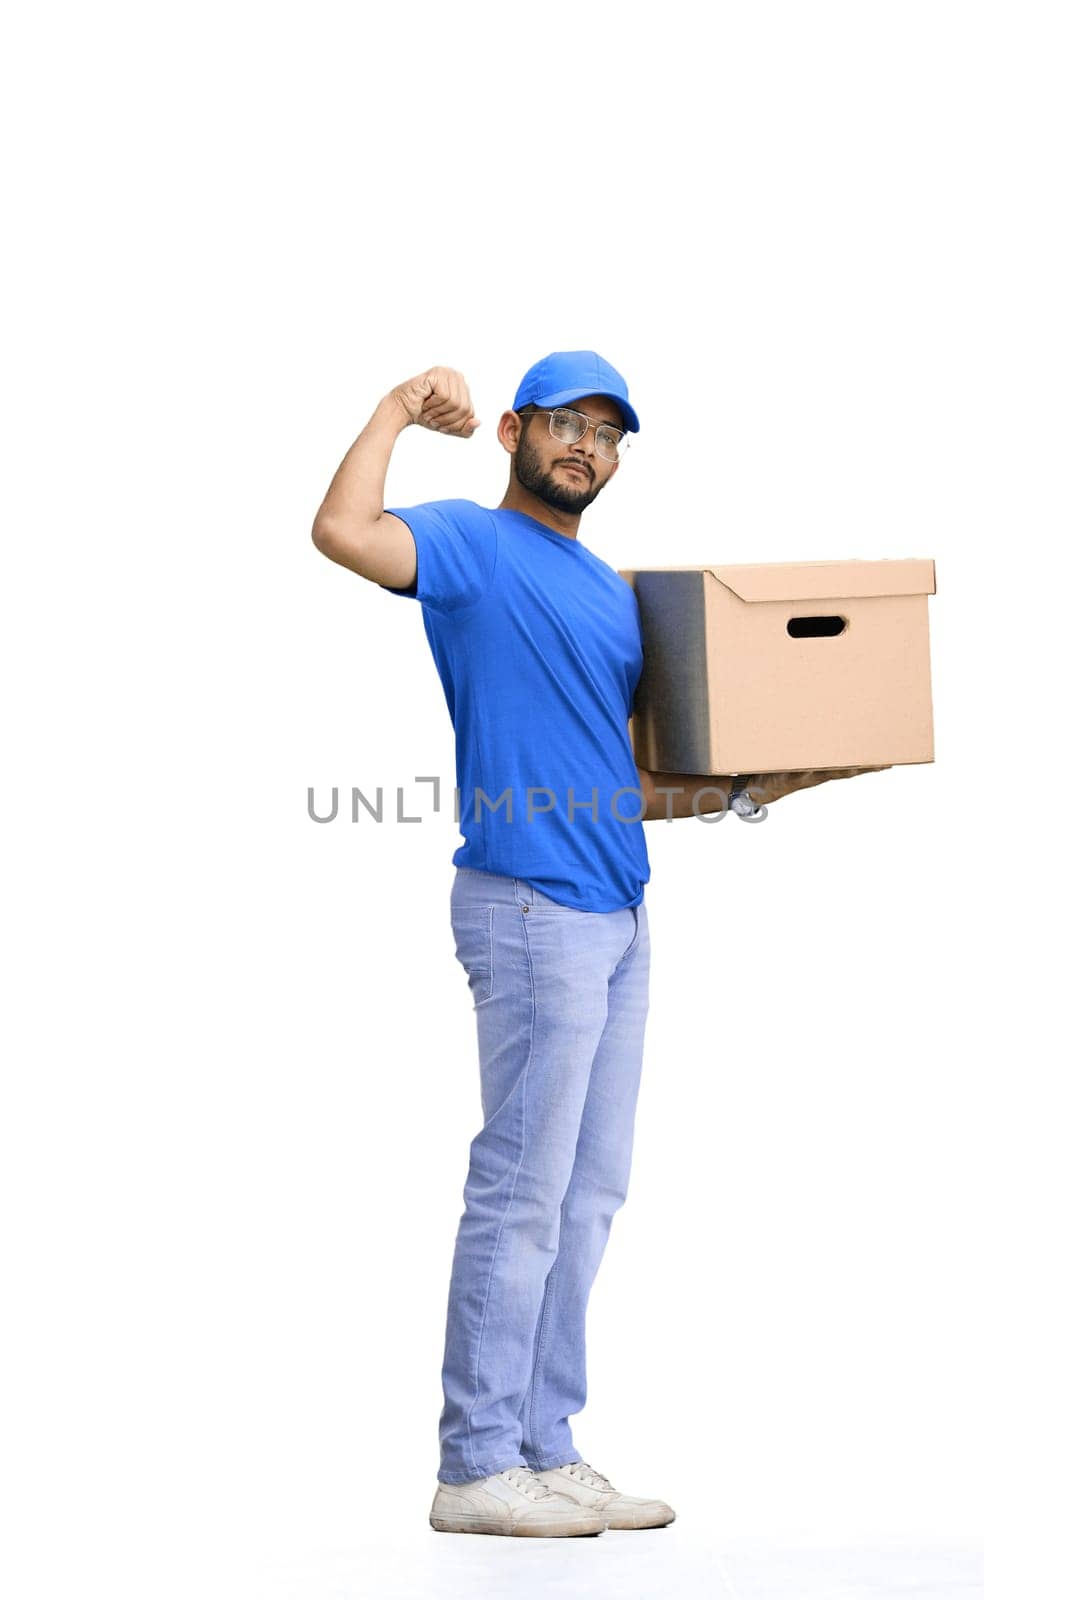 A male deliveryman, on a white background, in full height, with a box, shows strength.